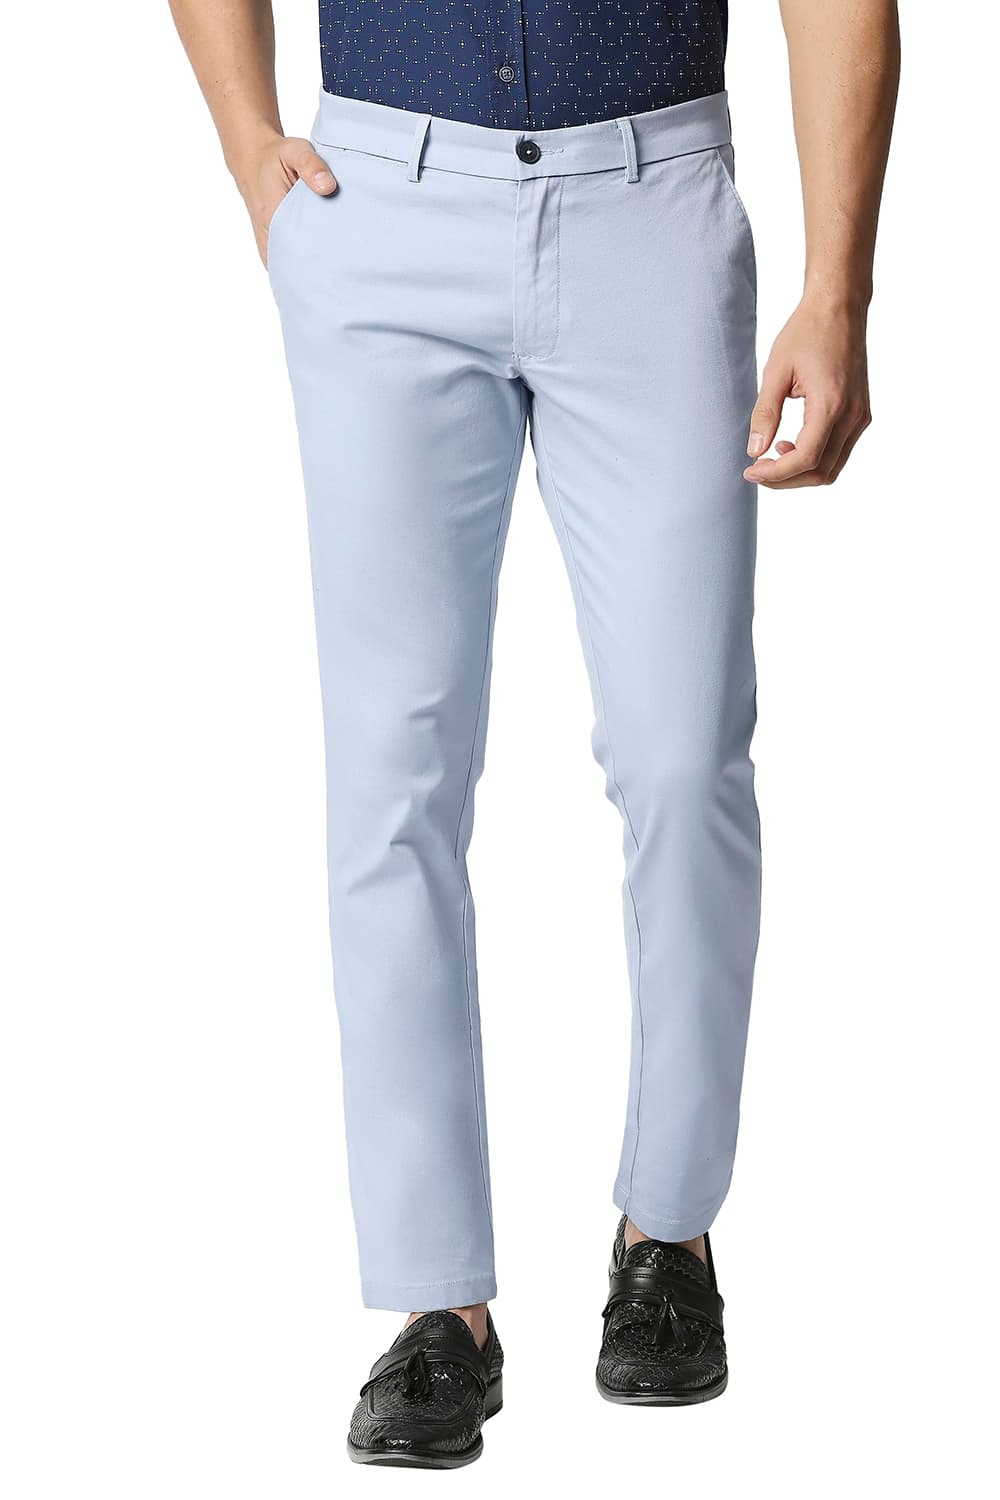 BASICS CASUAL SELF LIGHT BLUE COTTON STRETCH TAPERED TROUSERS 